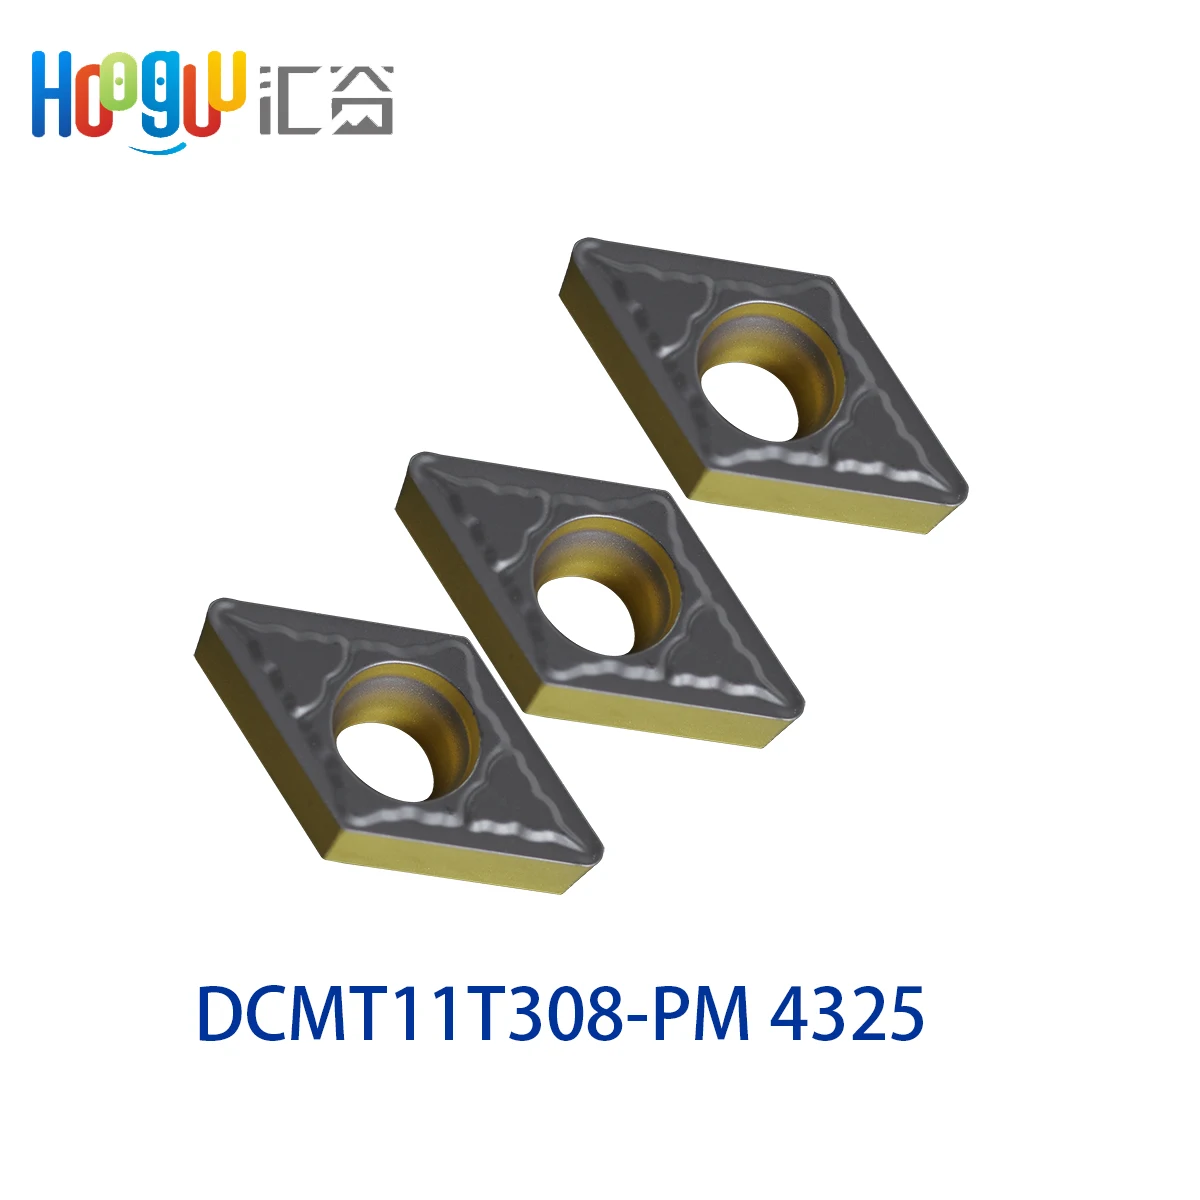 DCMT DCMT11T308 PM 4325 High Quality Turning Tool Coated Carbide CNC Lathe Machine Inserts